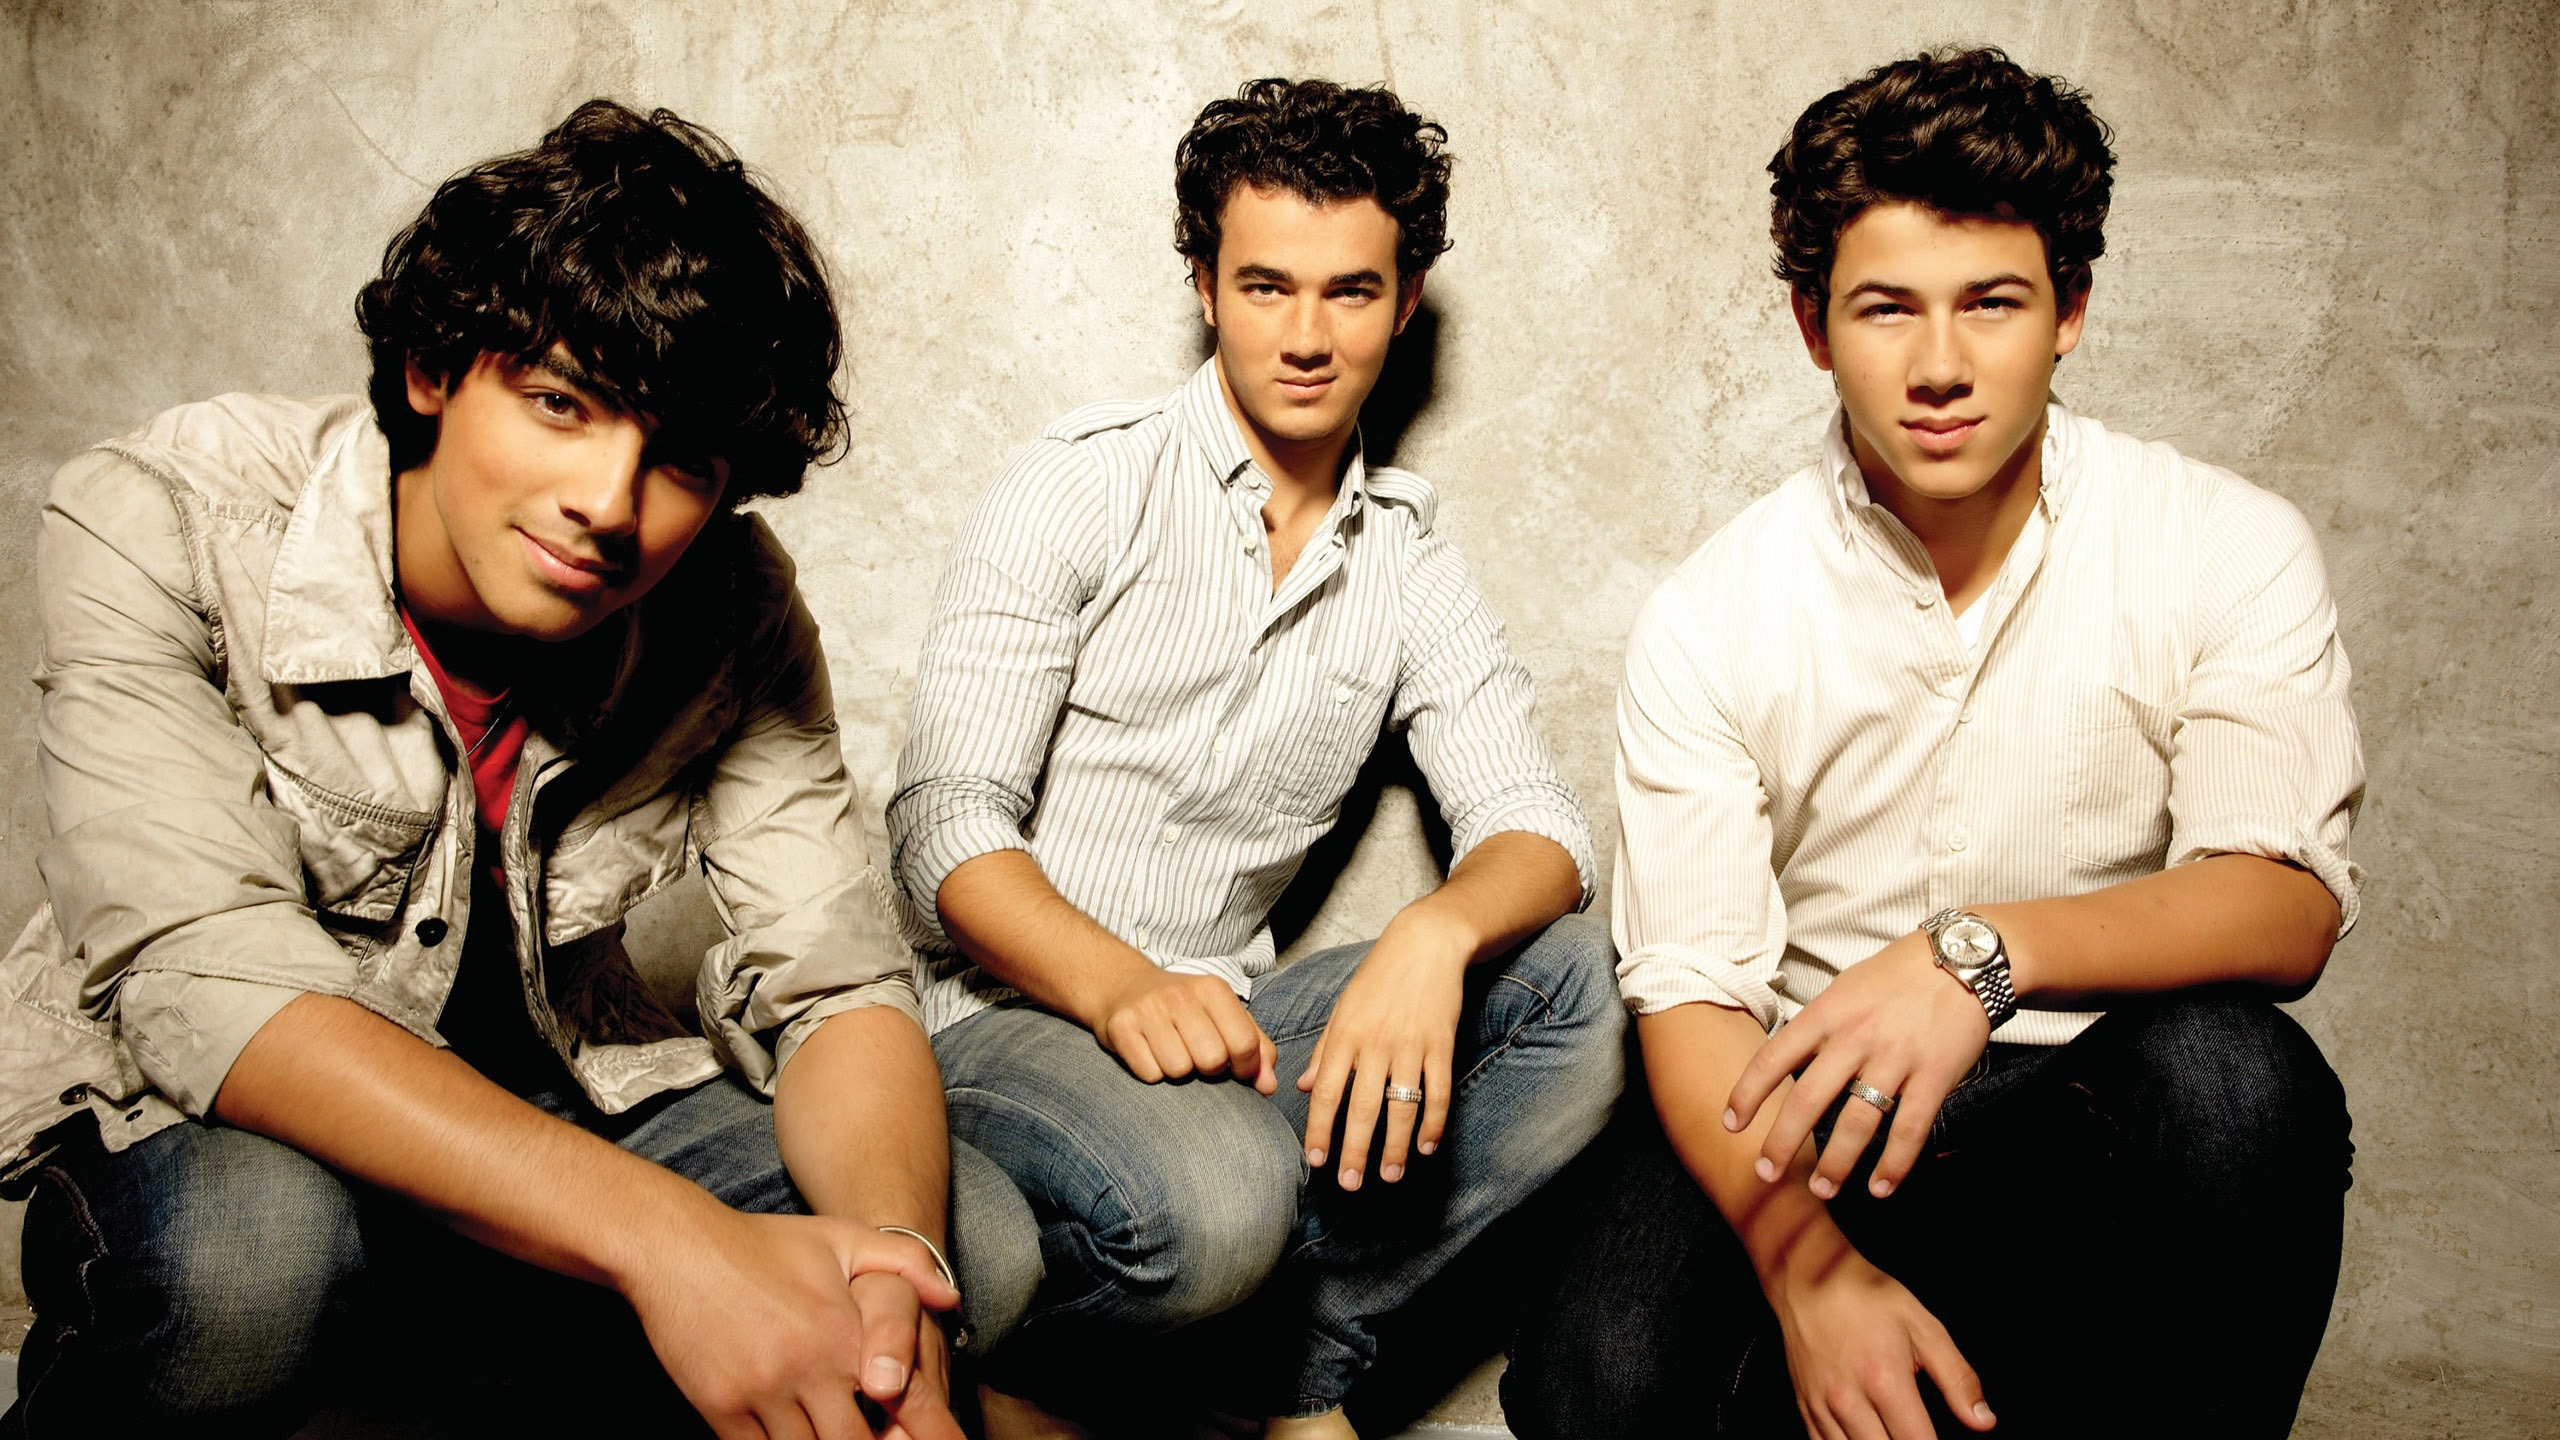 Cool Jonas Brothers for 2560x1440 HDTV resolution